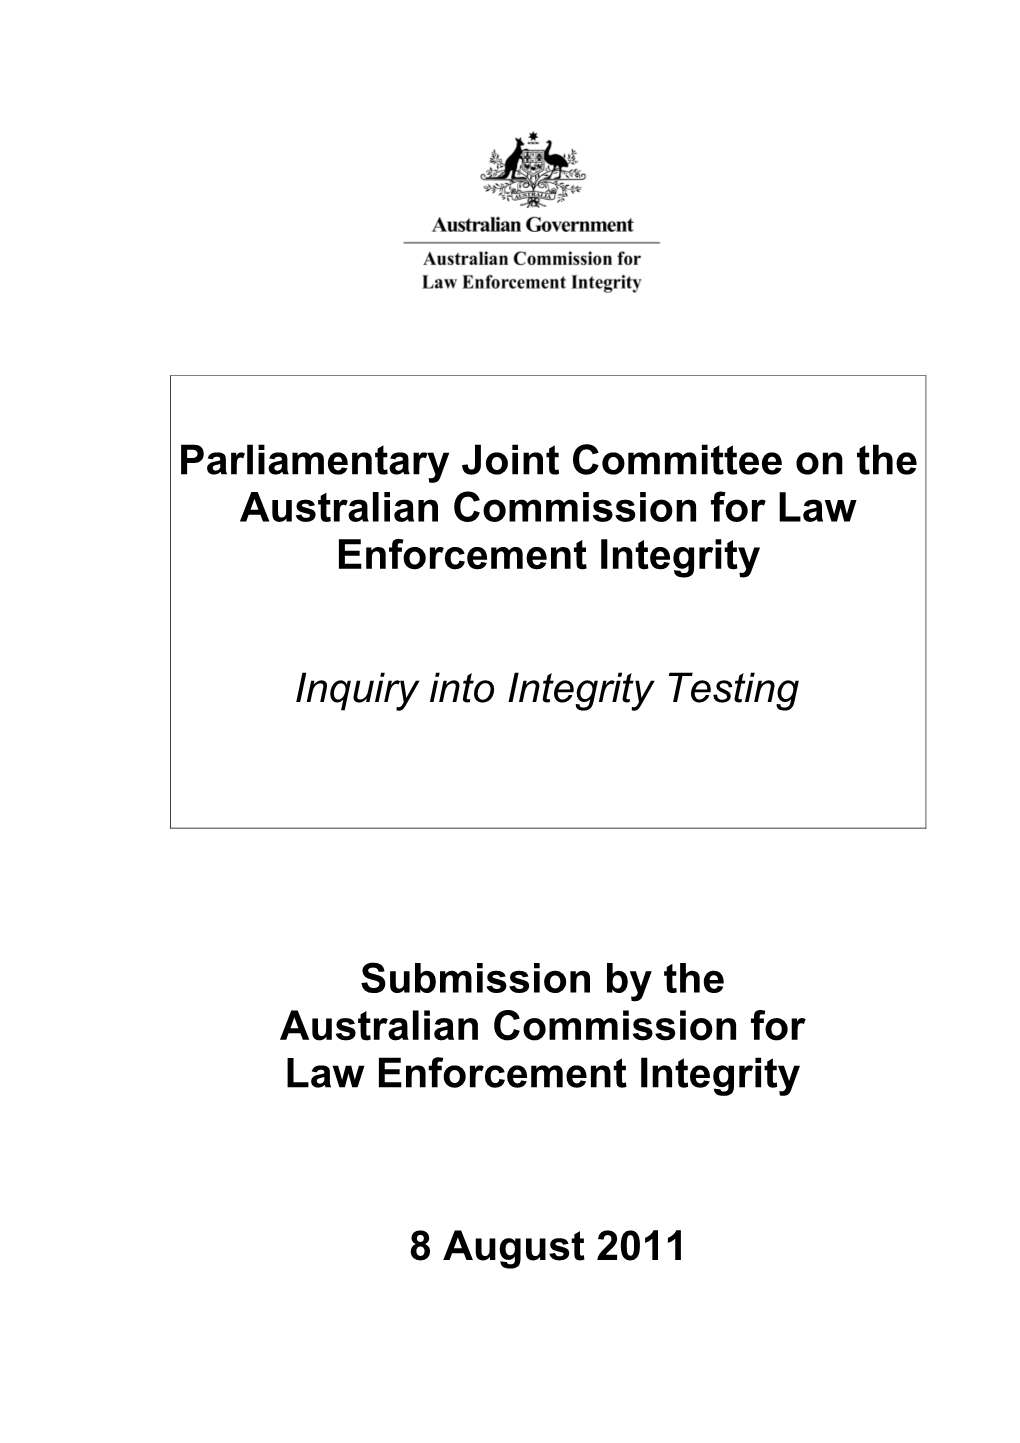 Parliamentary Joint Committee on the Australian Commission for Law Enforcement Integrity